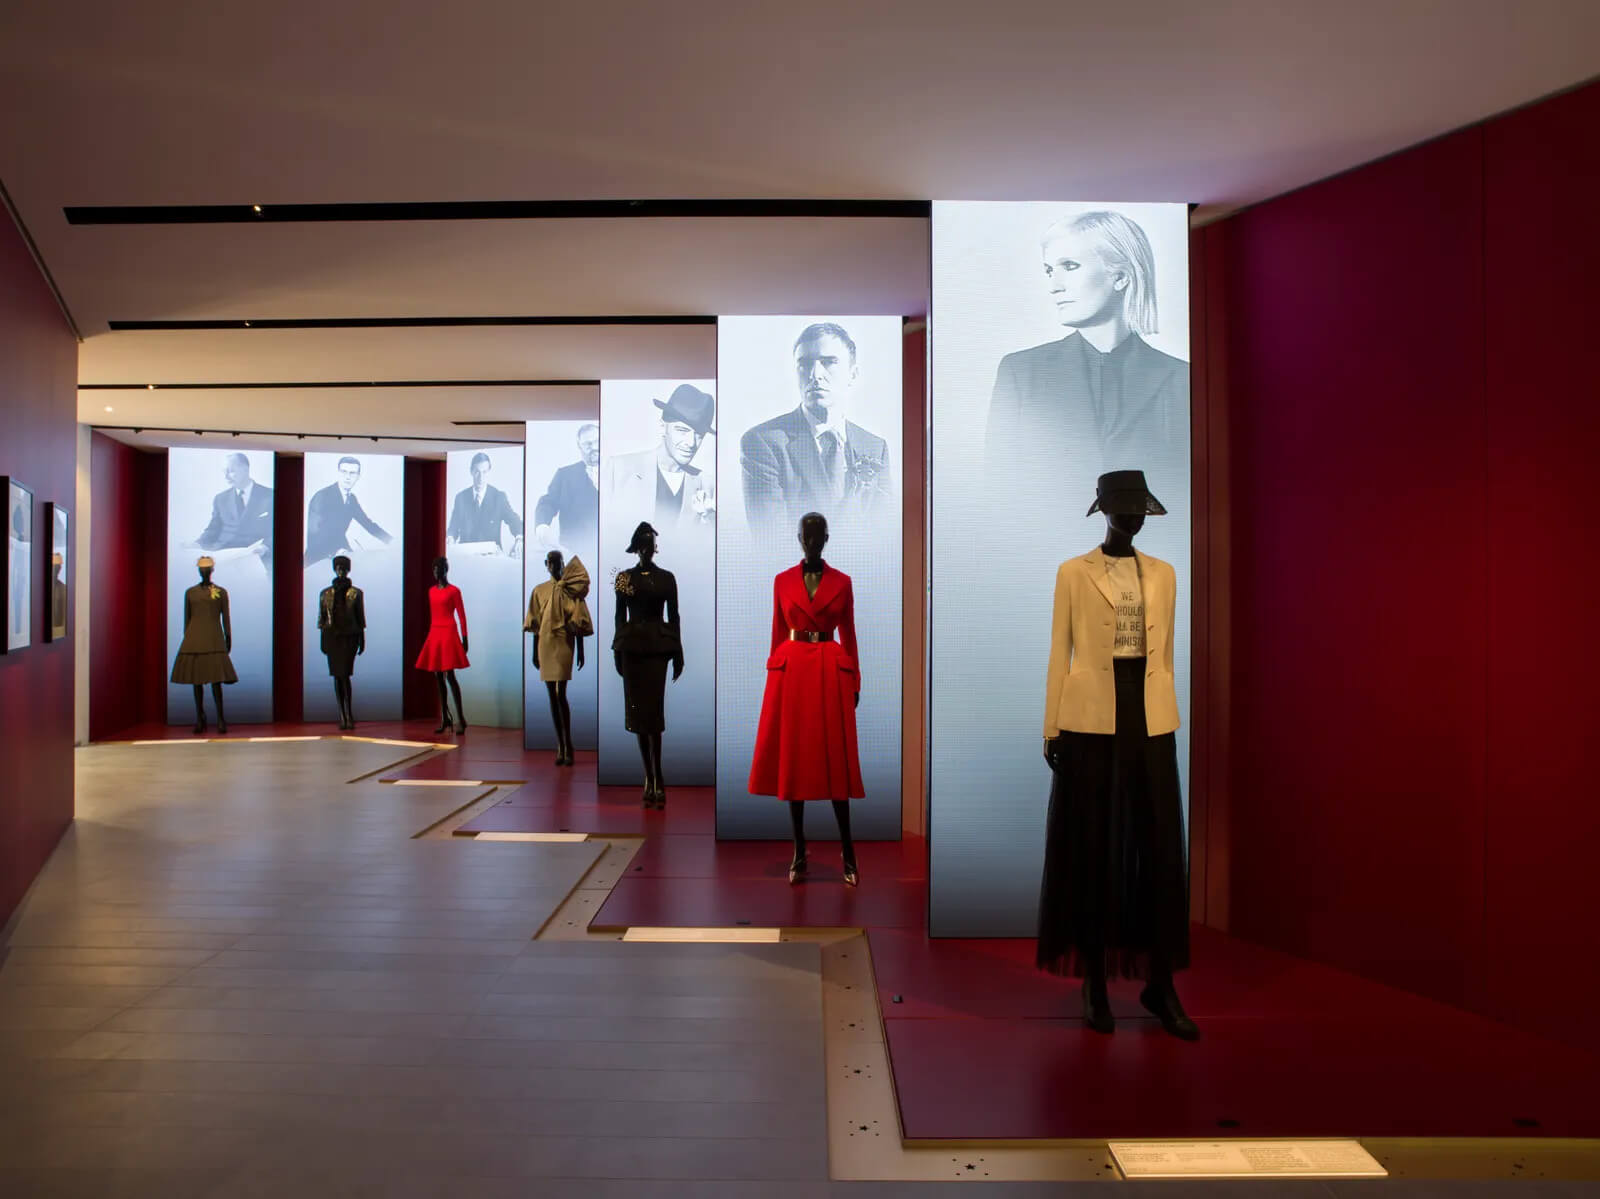 Peter Marino, iconic Dior flagship store on Avenue Montagne in Paris